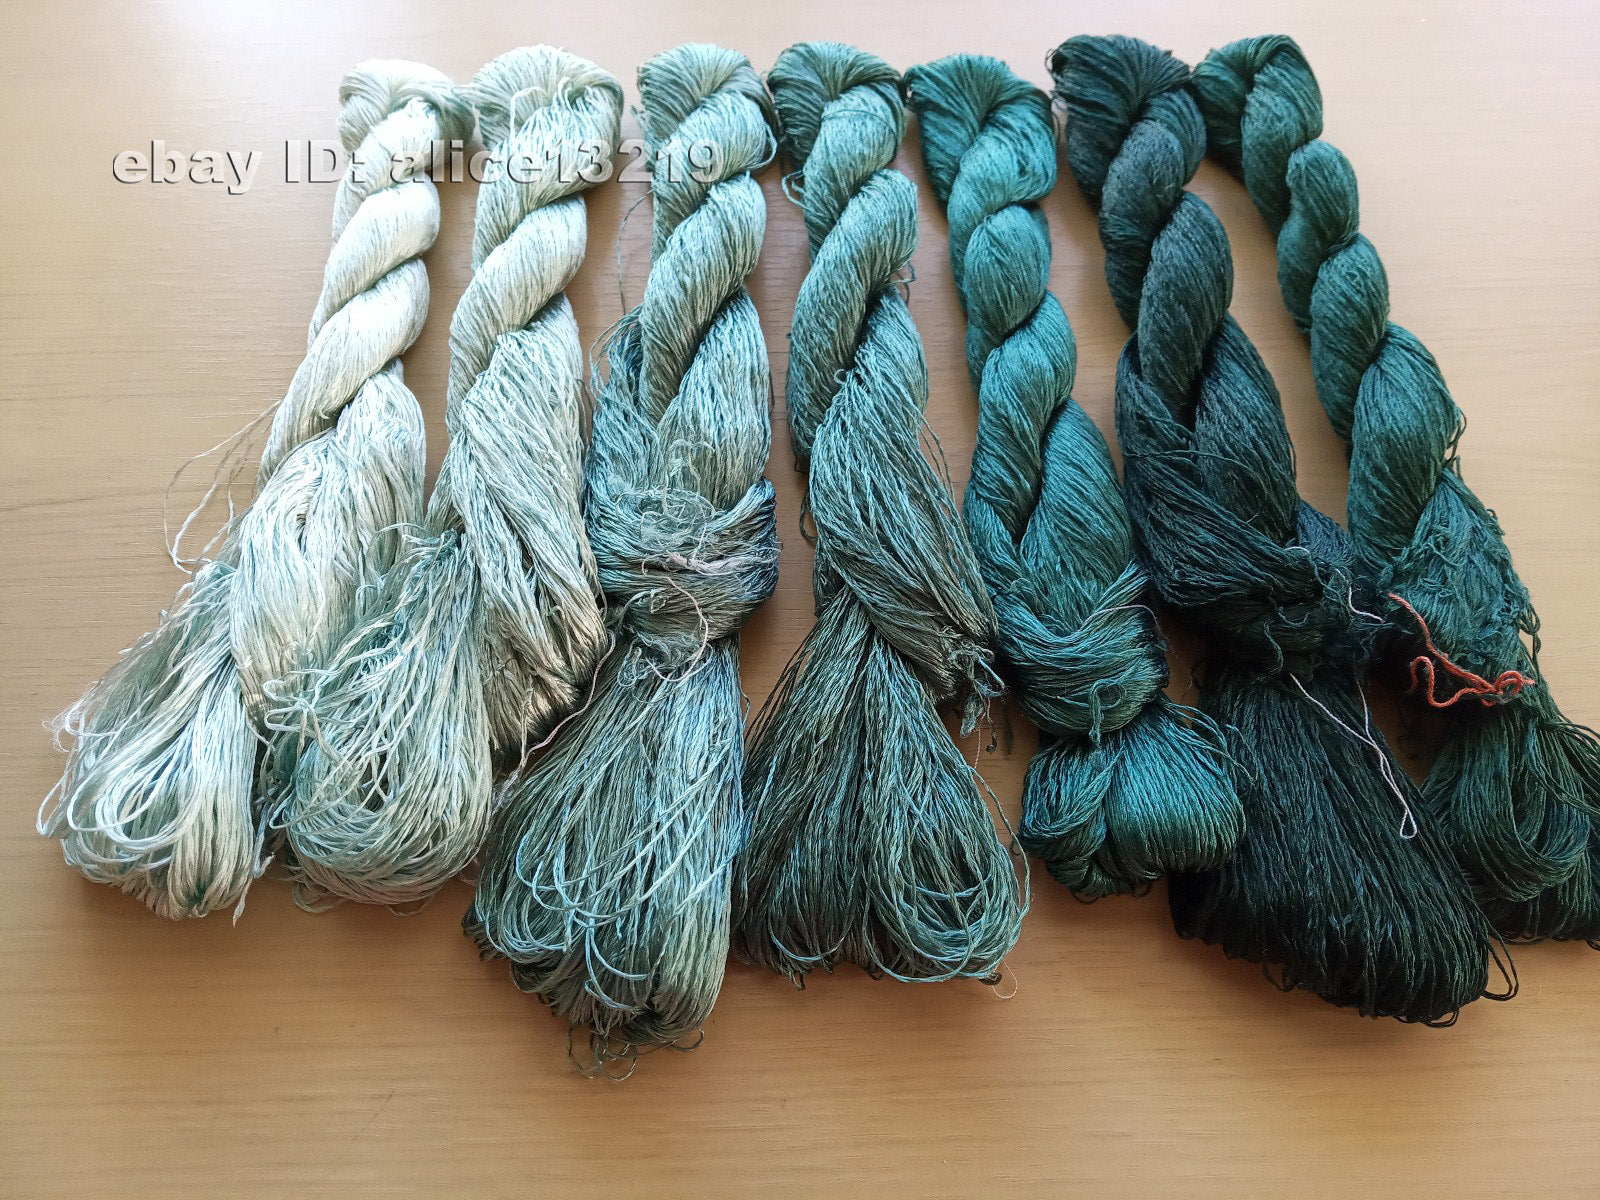 7bundles 100%real mulberry silk,hand-dyed embroidery silk floss/thread N47